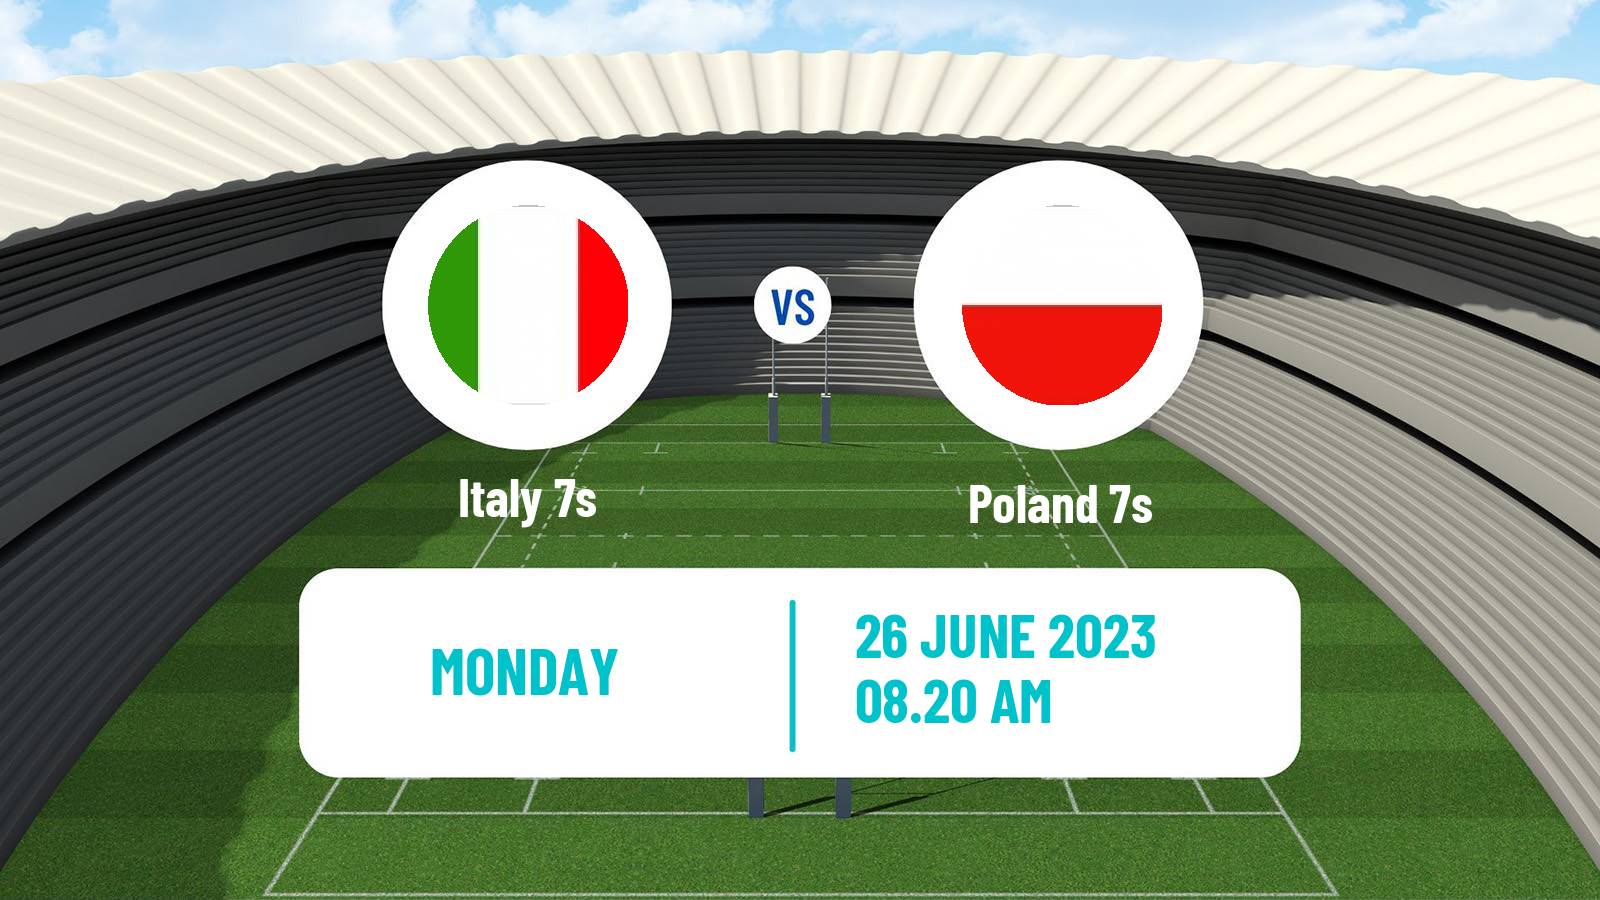 Rugby union European Games 7s Rugby Italy 7s - Poland 7s